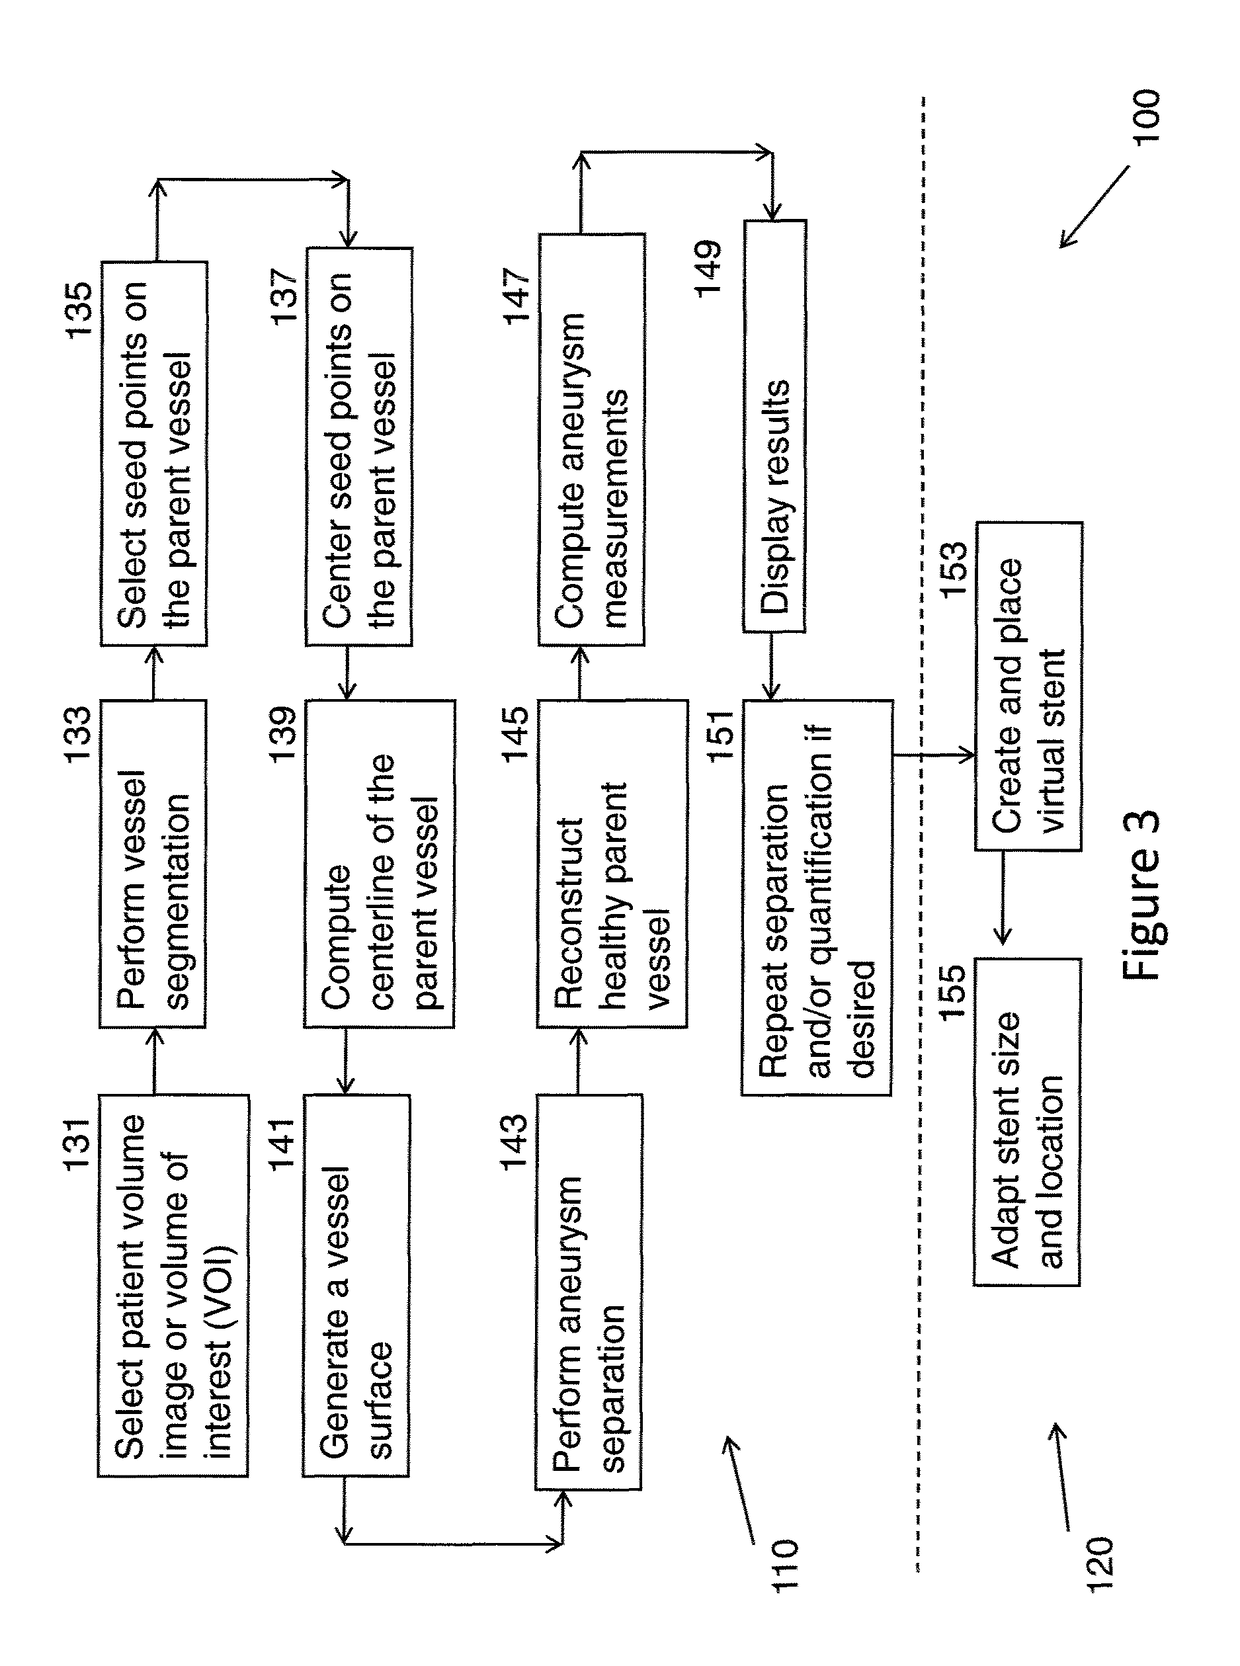 Method for intracranial aneurysm analysis and endovascular intervention planning